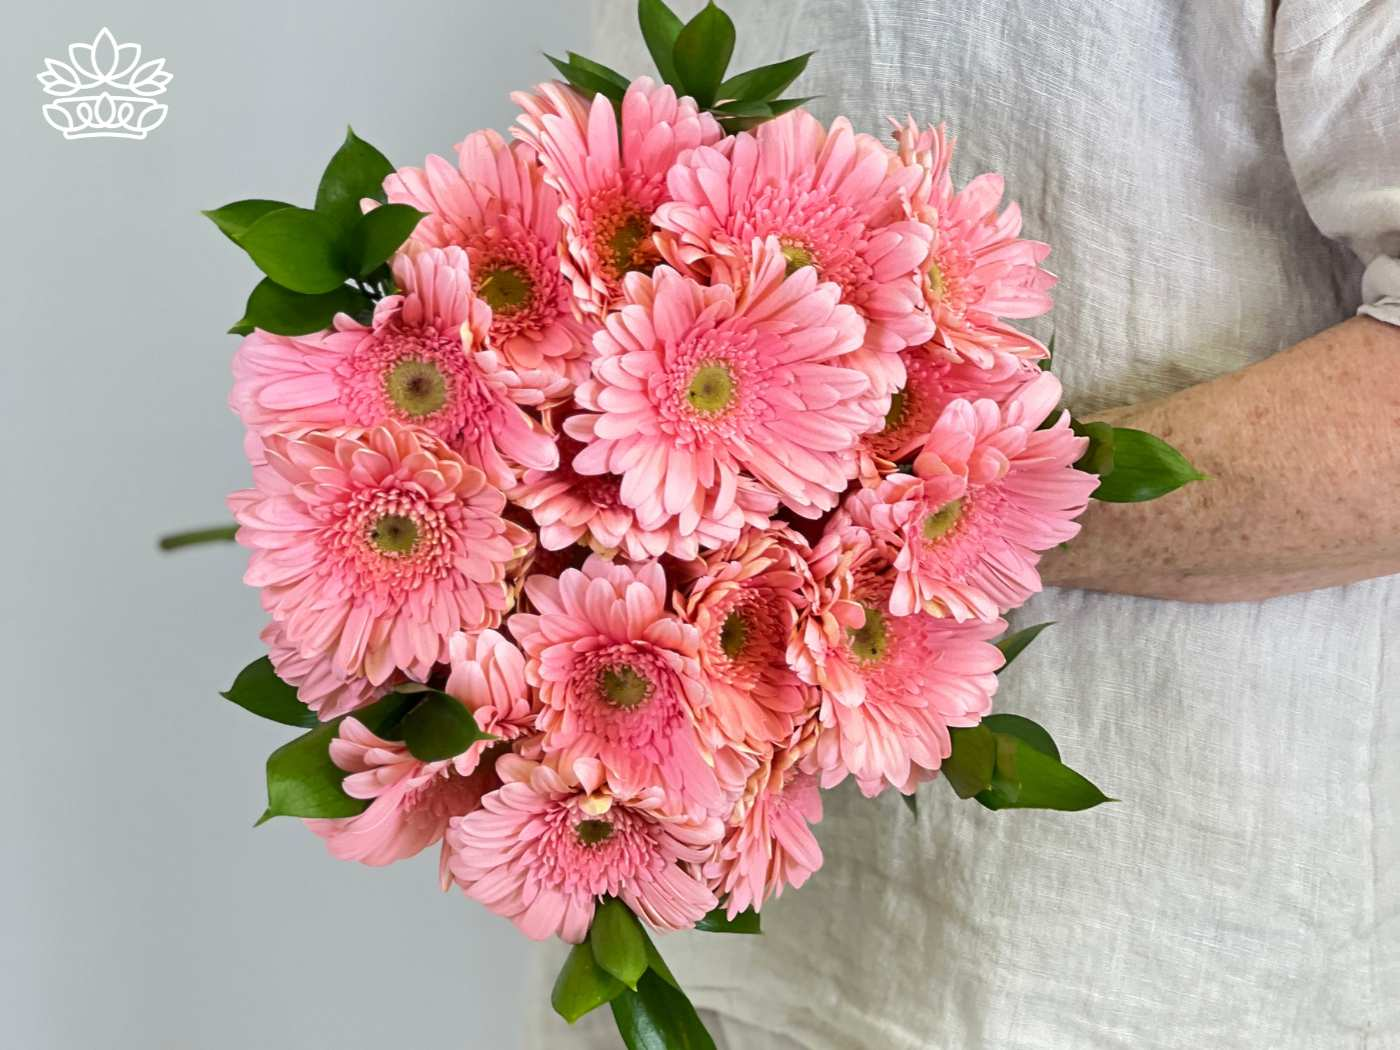 A soft pink bouquet of Gerbera daisies, held with care and accompanied by green leaves. Fabulous Flowers and Gifts. Gerberas Collection. Delivered with Heart.